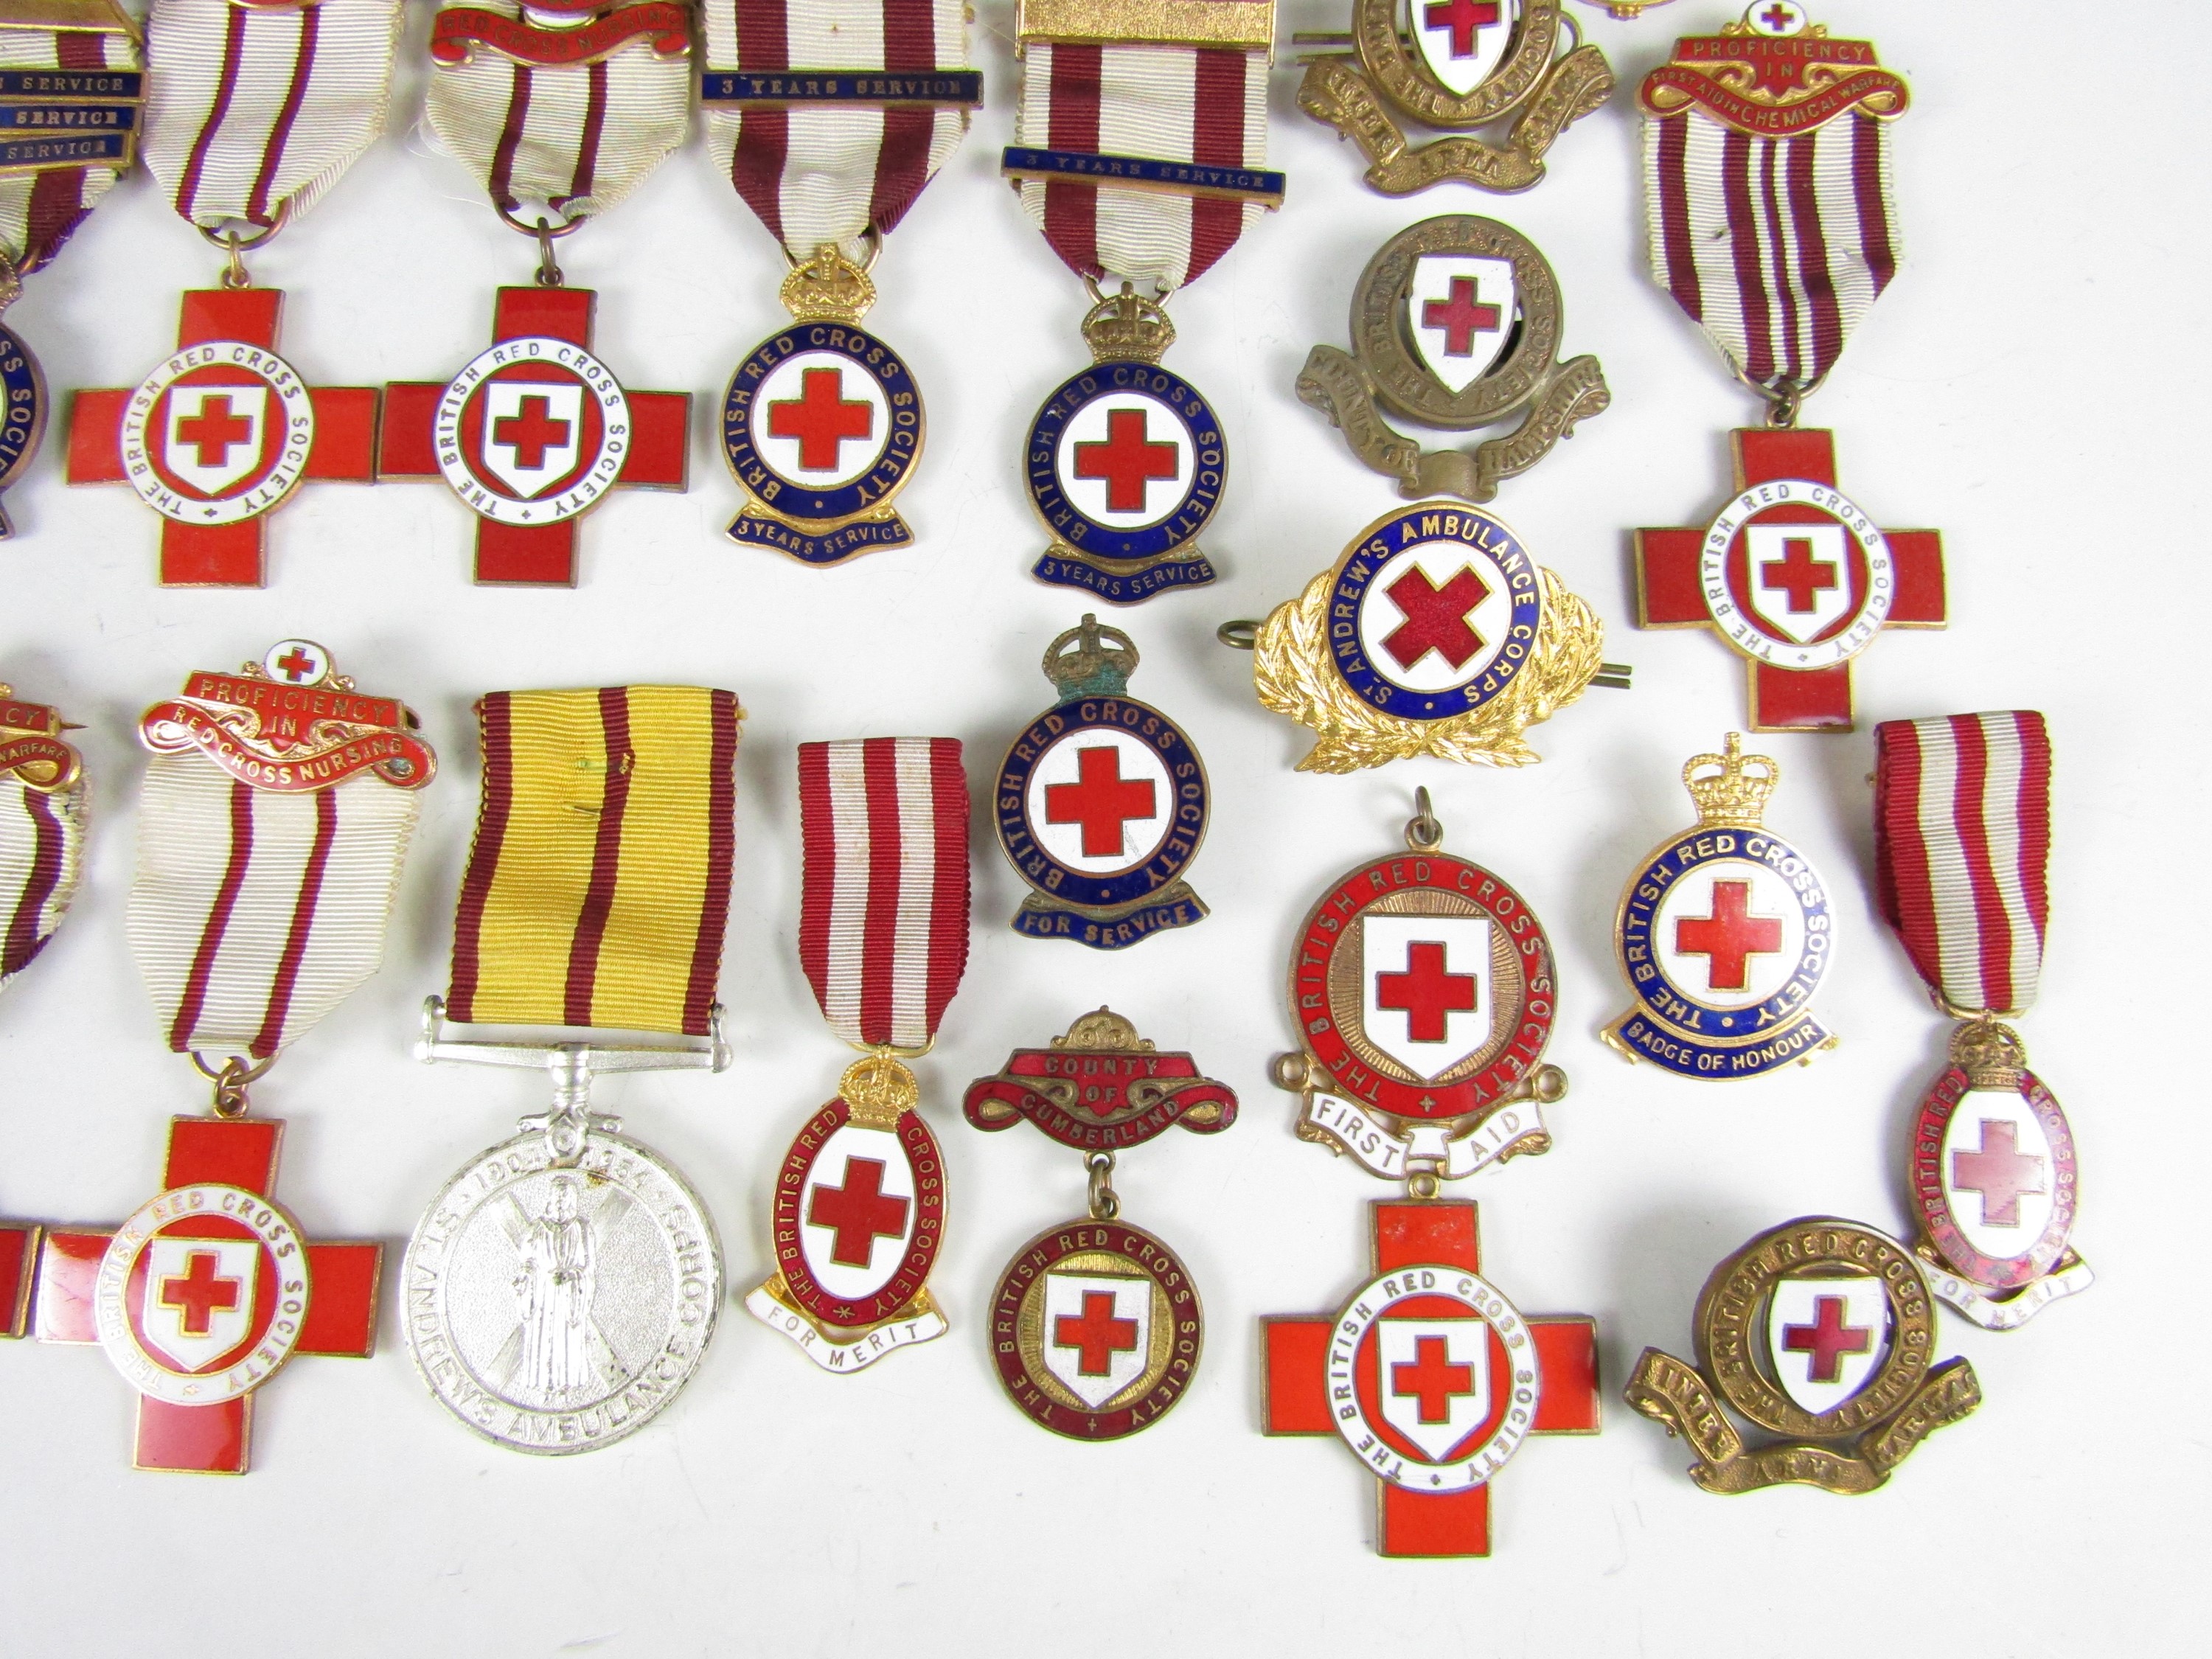 A large quantity of Red Cross and similar medals and insignia - Image 3 of 4